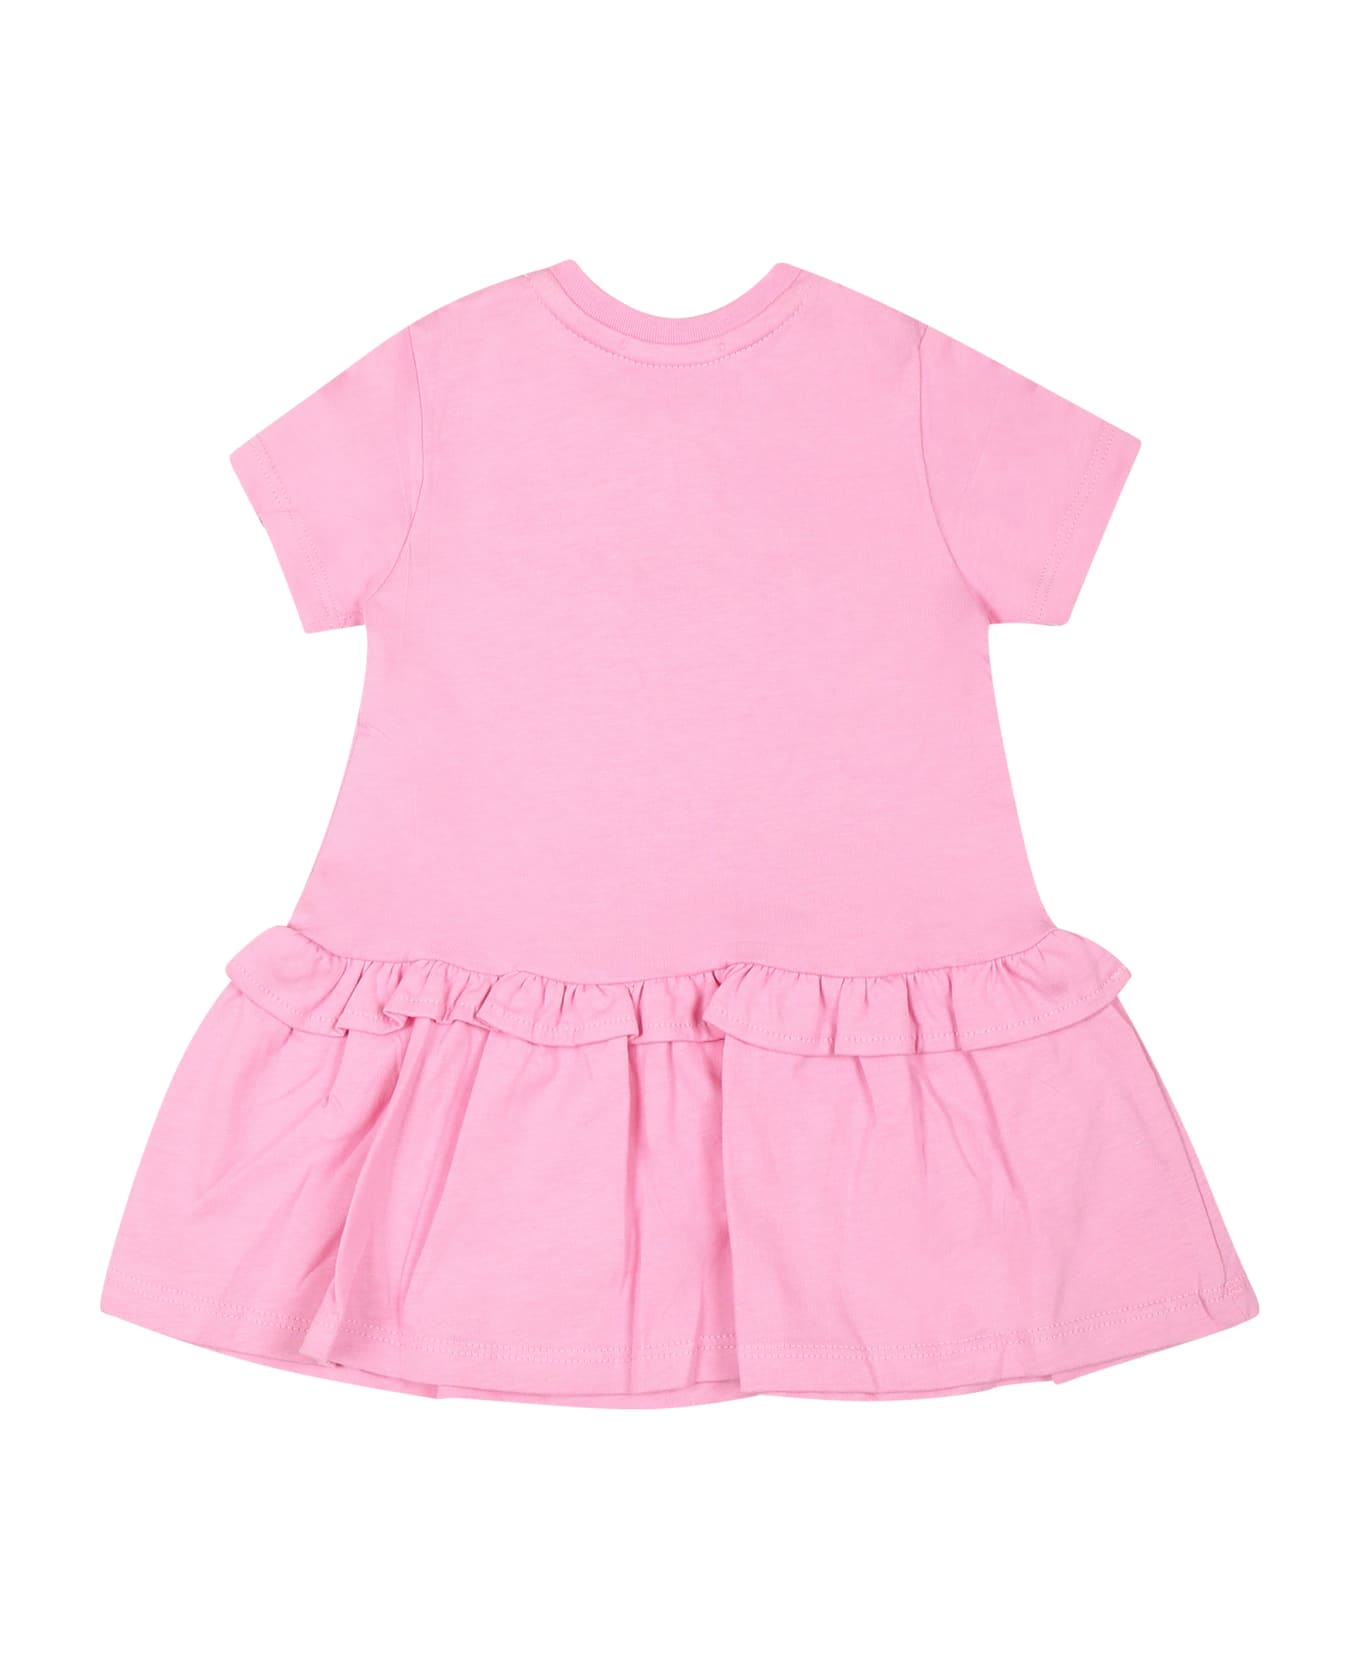 MSGM Pink Dress For Baby Girl With Logo - Pink ウェア